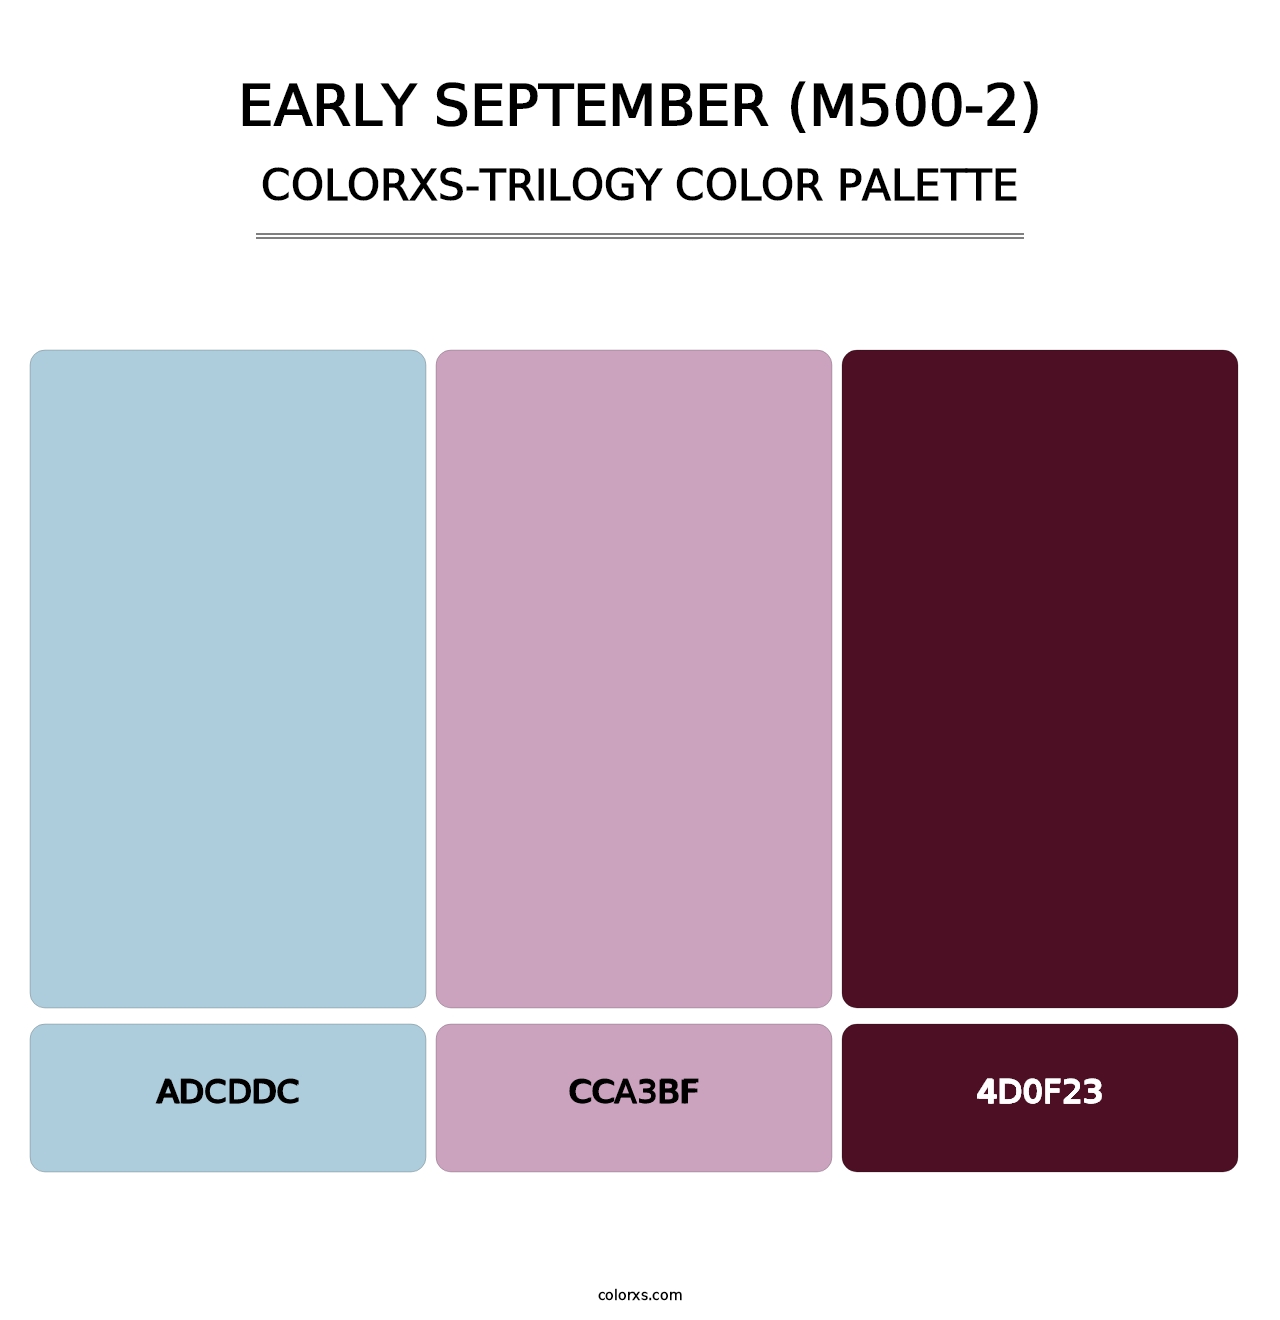 Early September (M500-2) - Colorxs Trilogy Palette